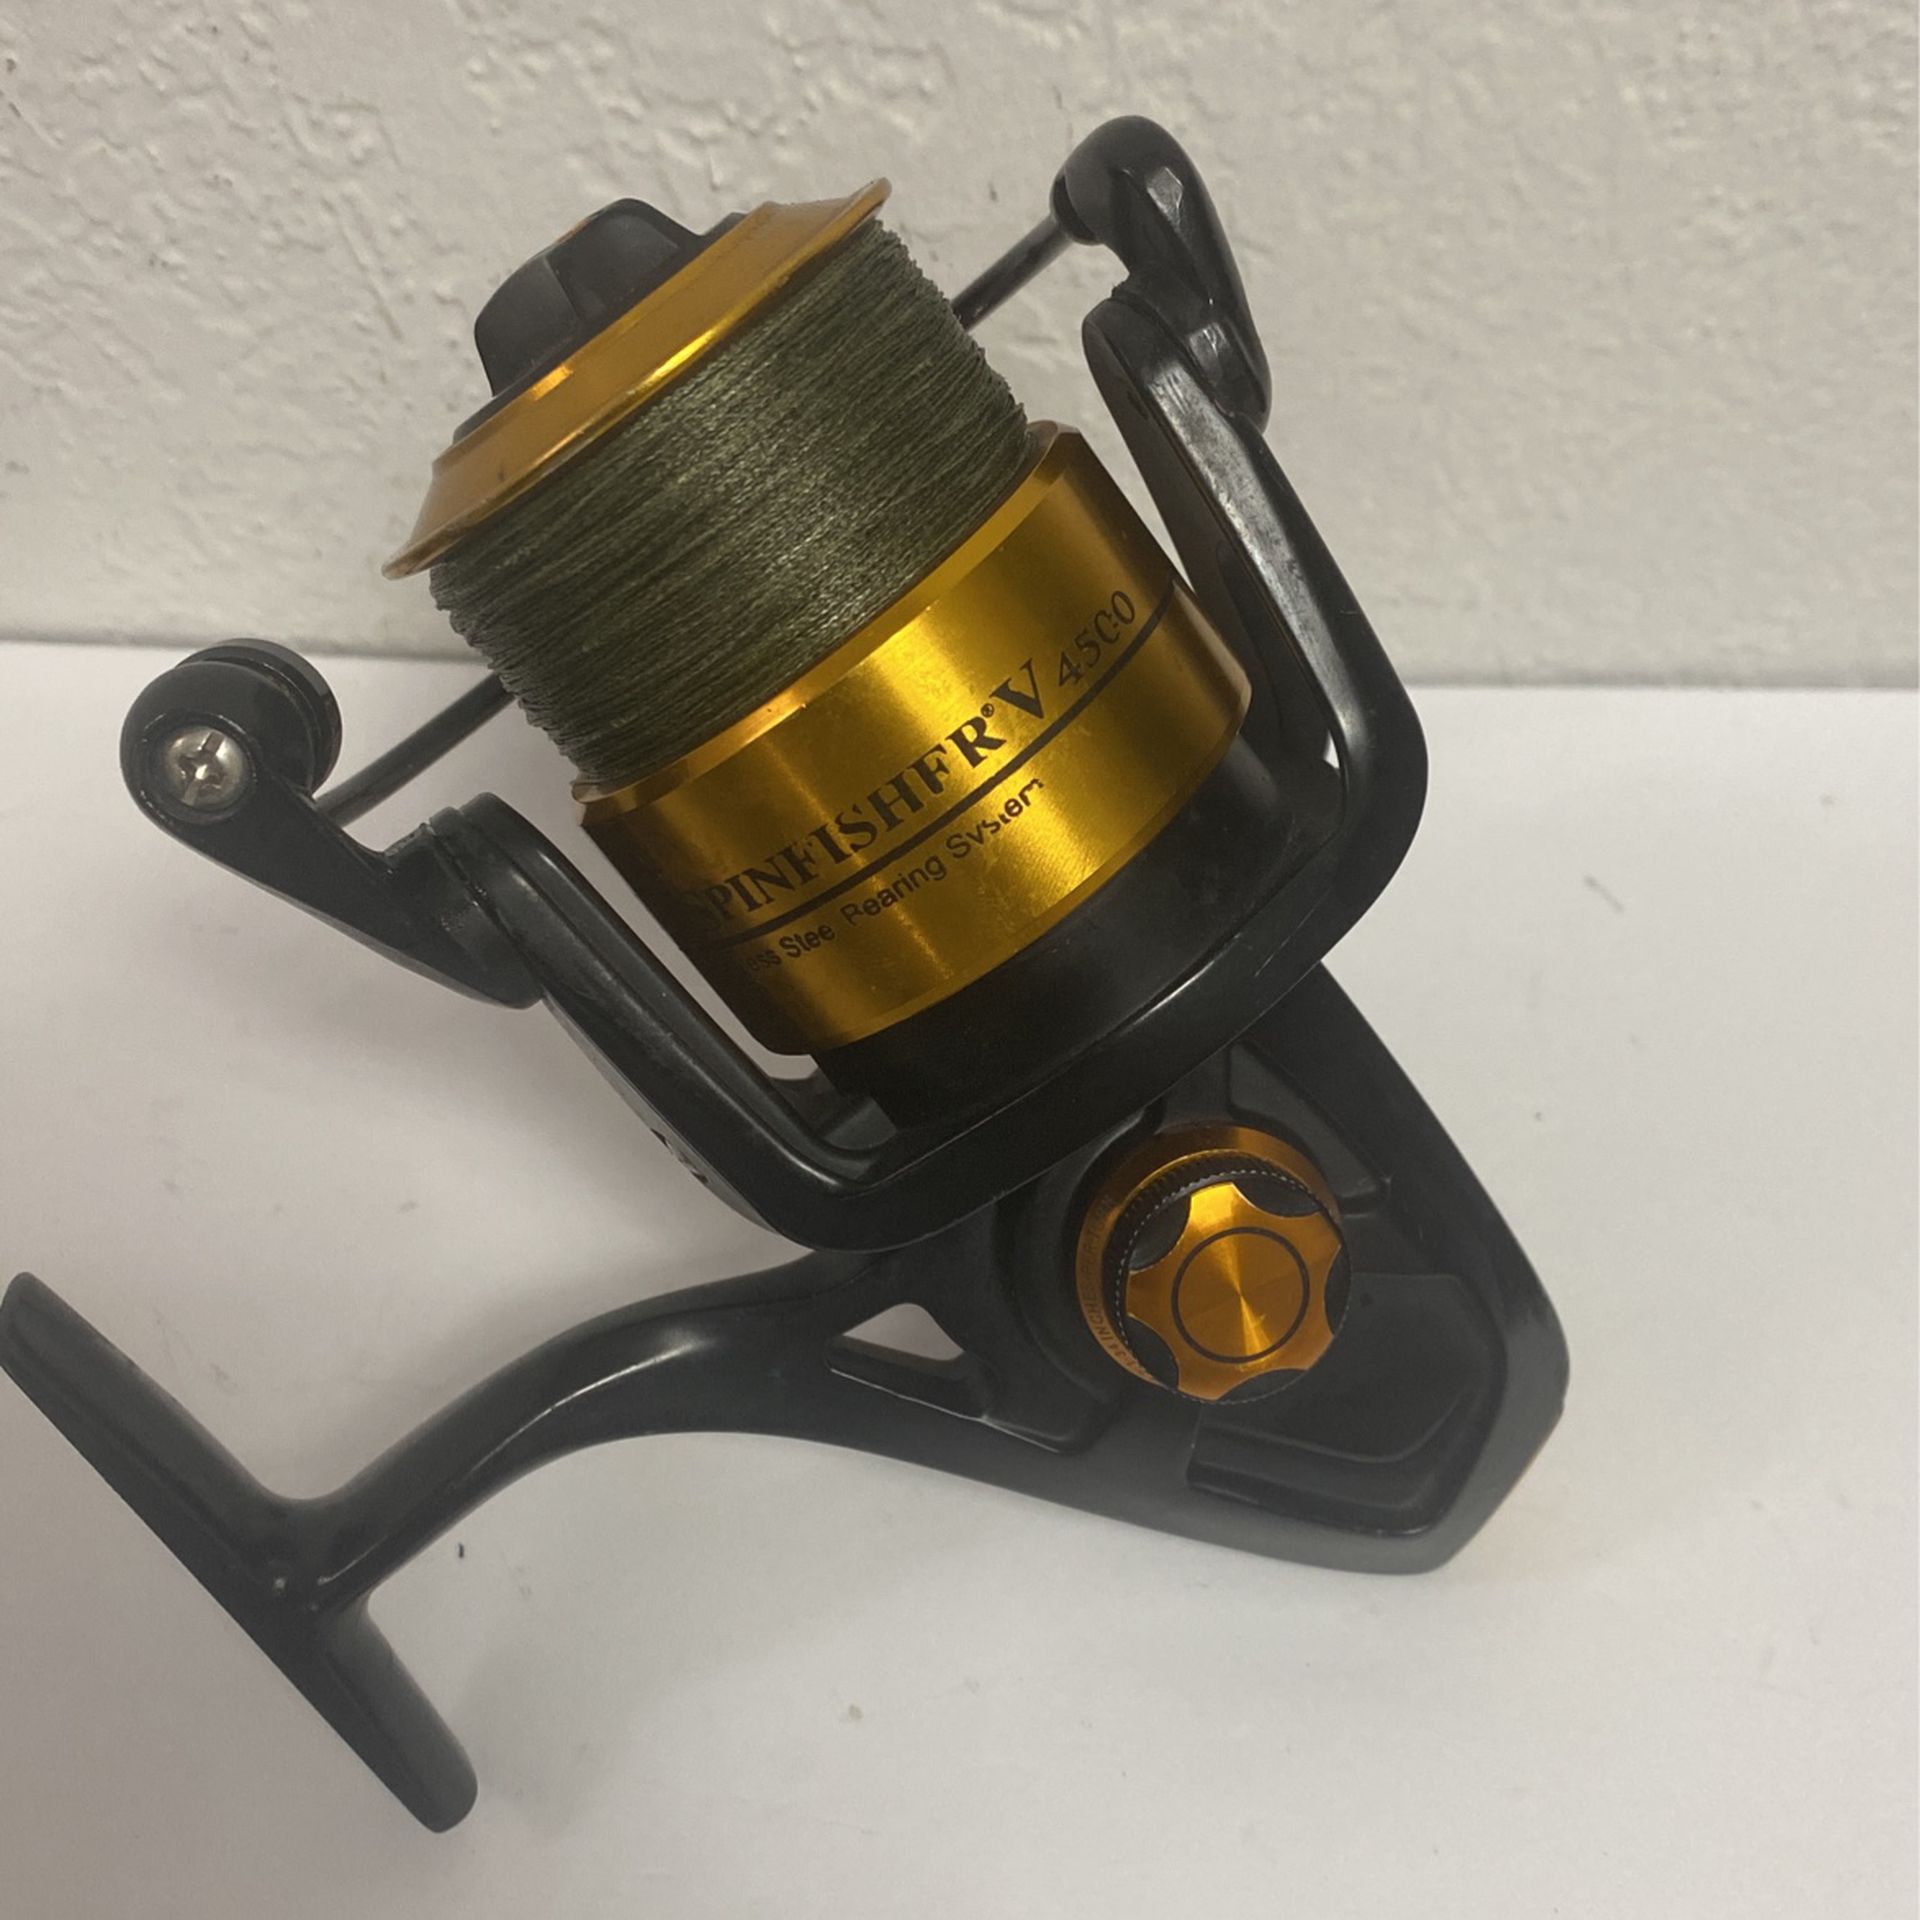 Penn Spinfisher V 4500 Spinning Reel for Sale in Miami, FL - OfferUp